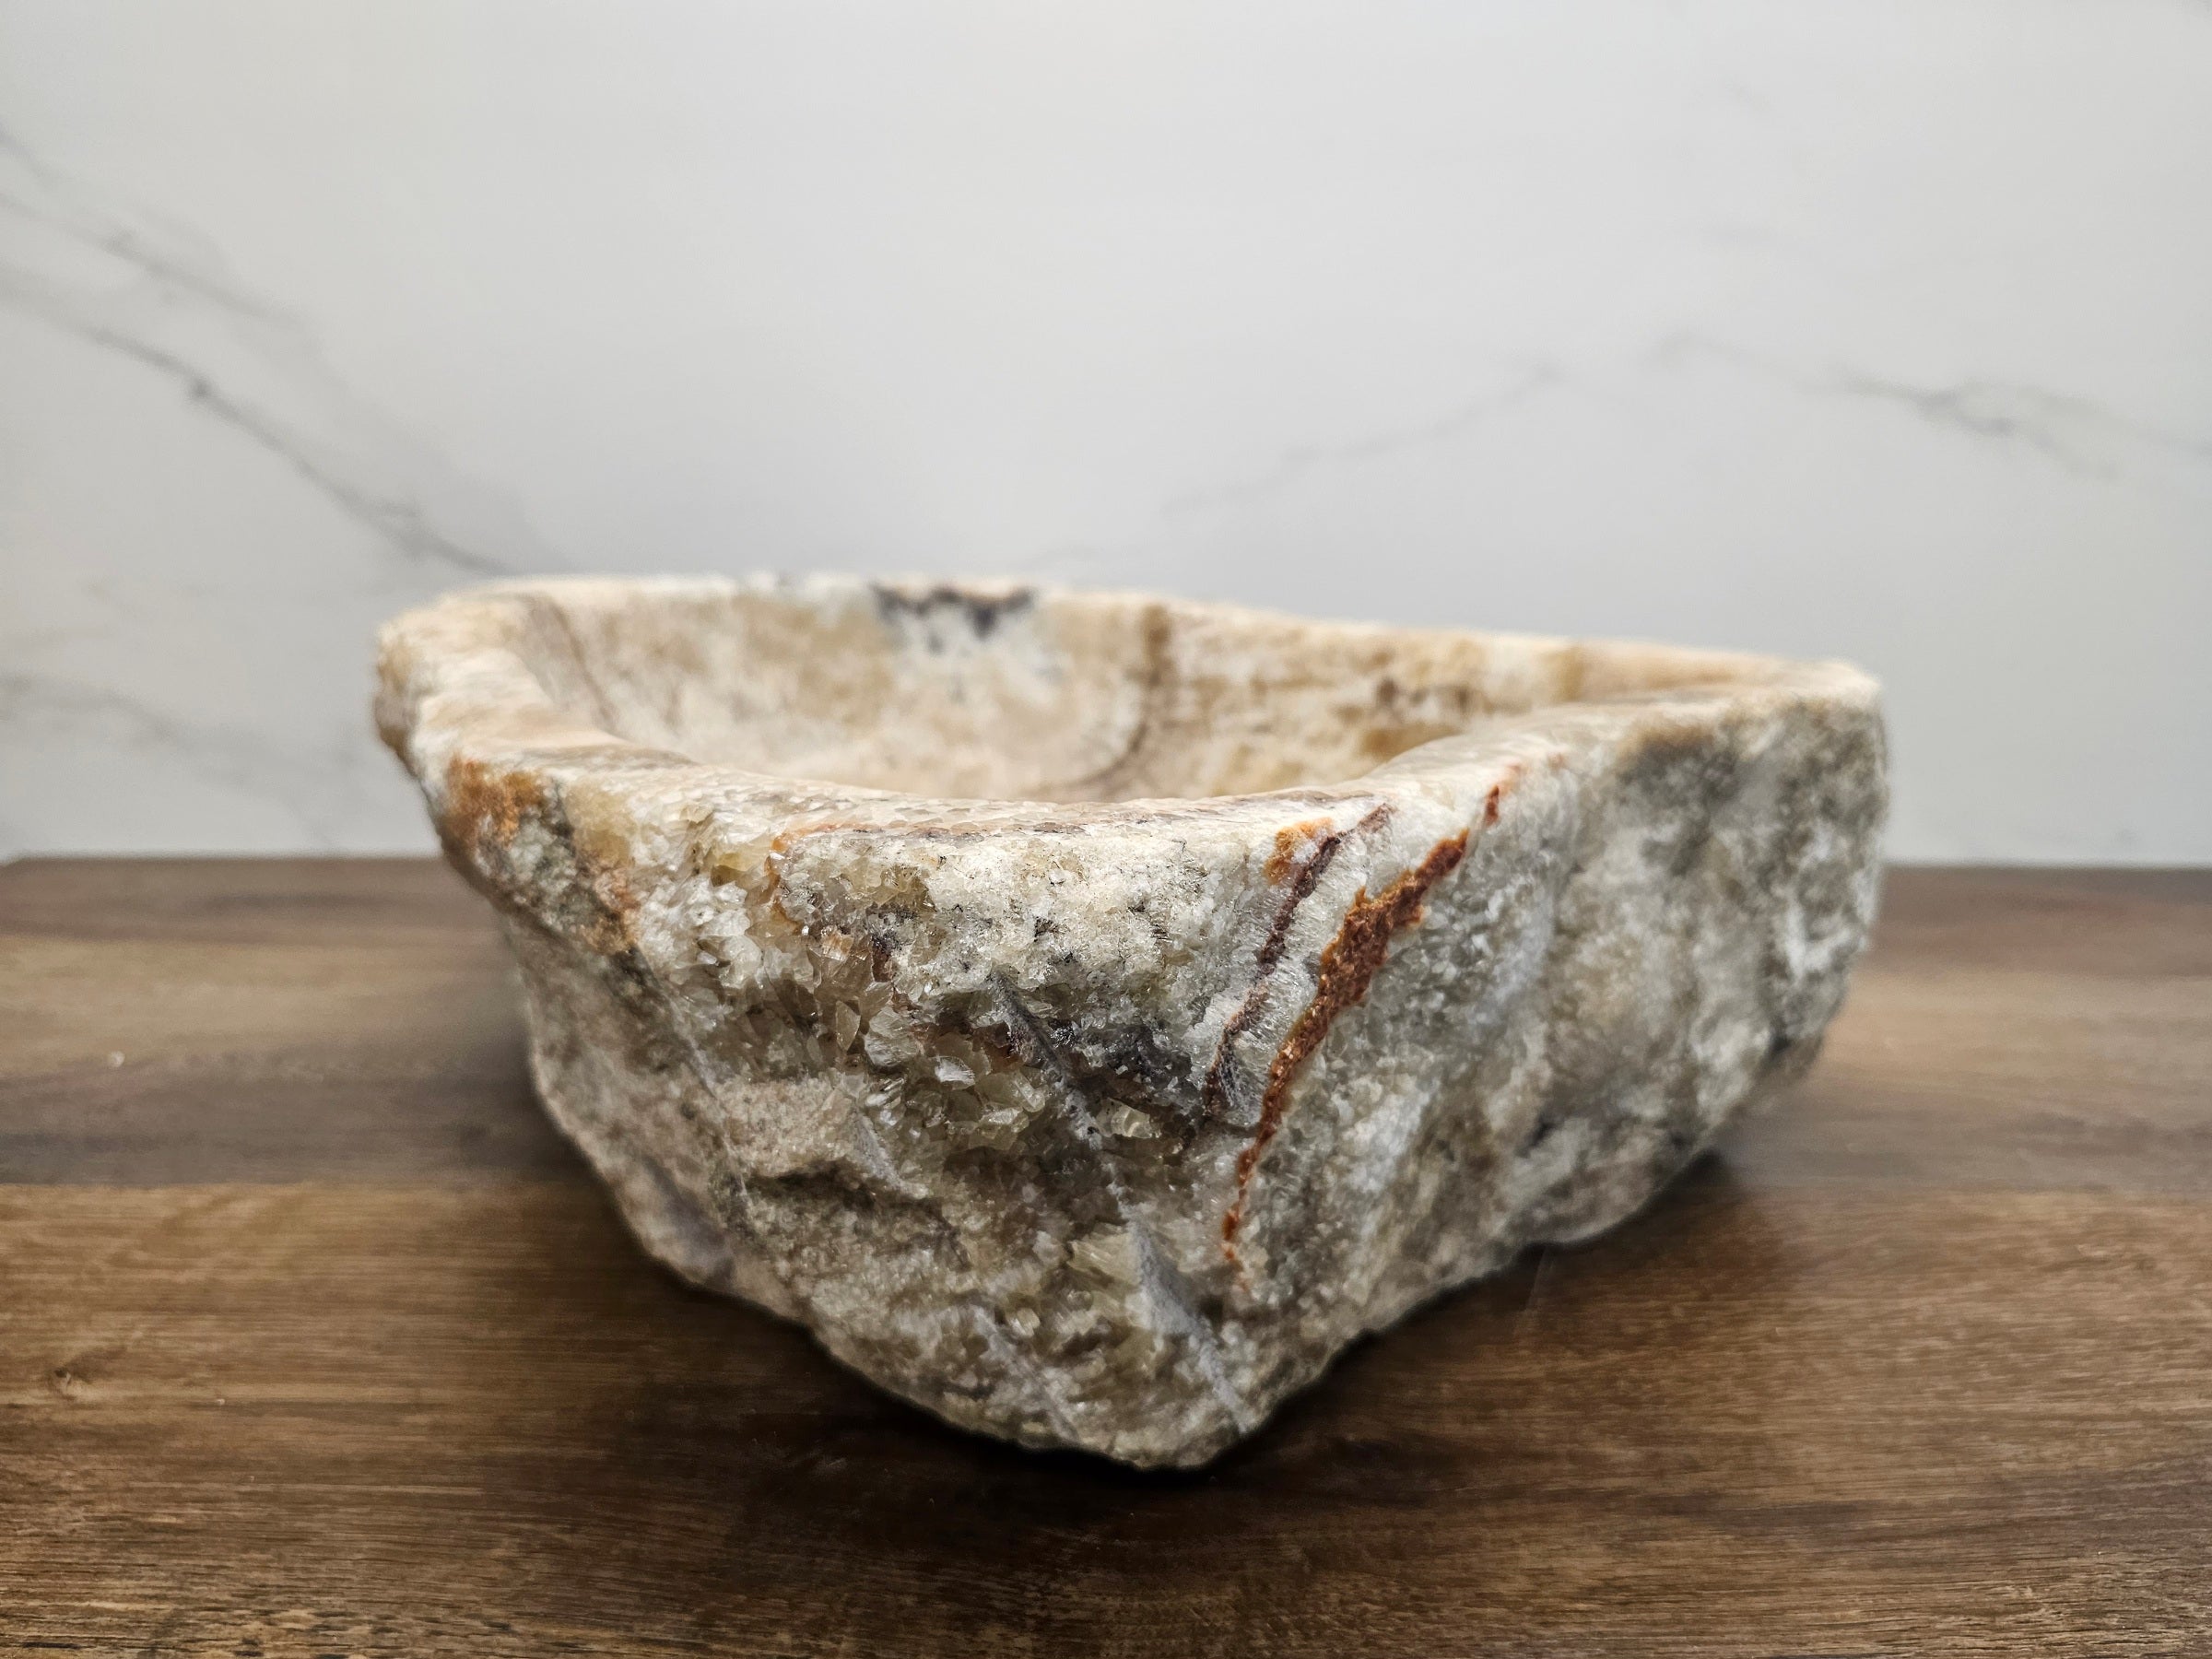 Brown and Tan Onyx Stone  Bathroom Vessel Sink. Epoxy Sealant is available with fast shipping. Standard drain size. A beautiful work of rustic art. Handmade. Buy Now at www.felipeandgrace.com.